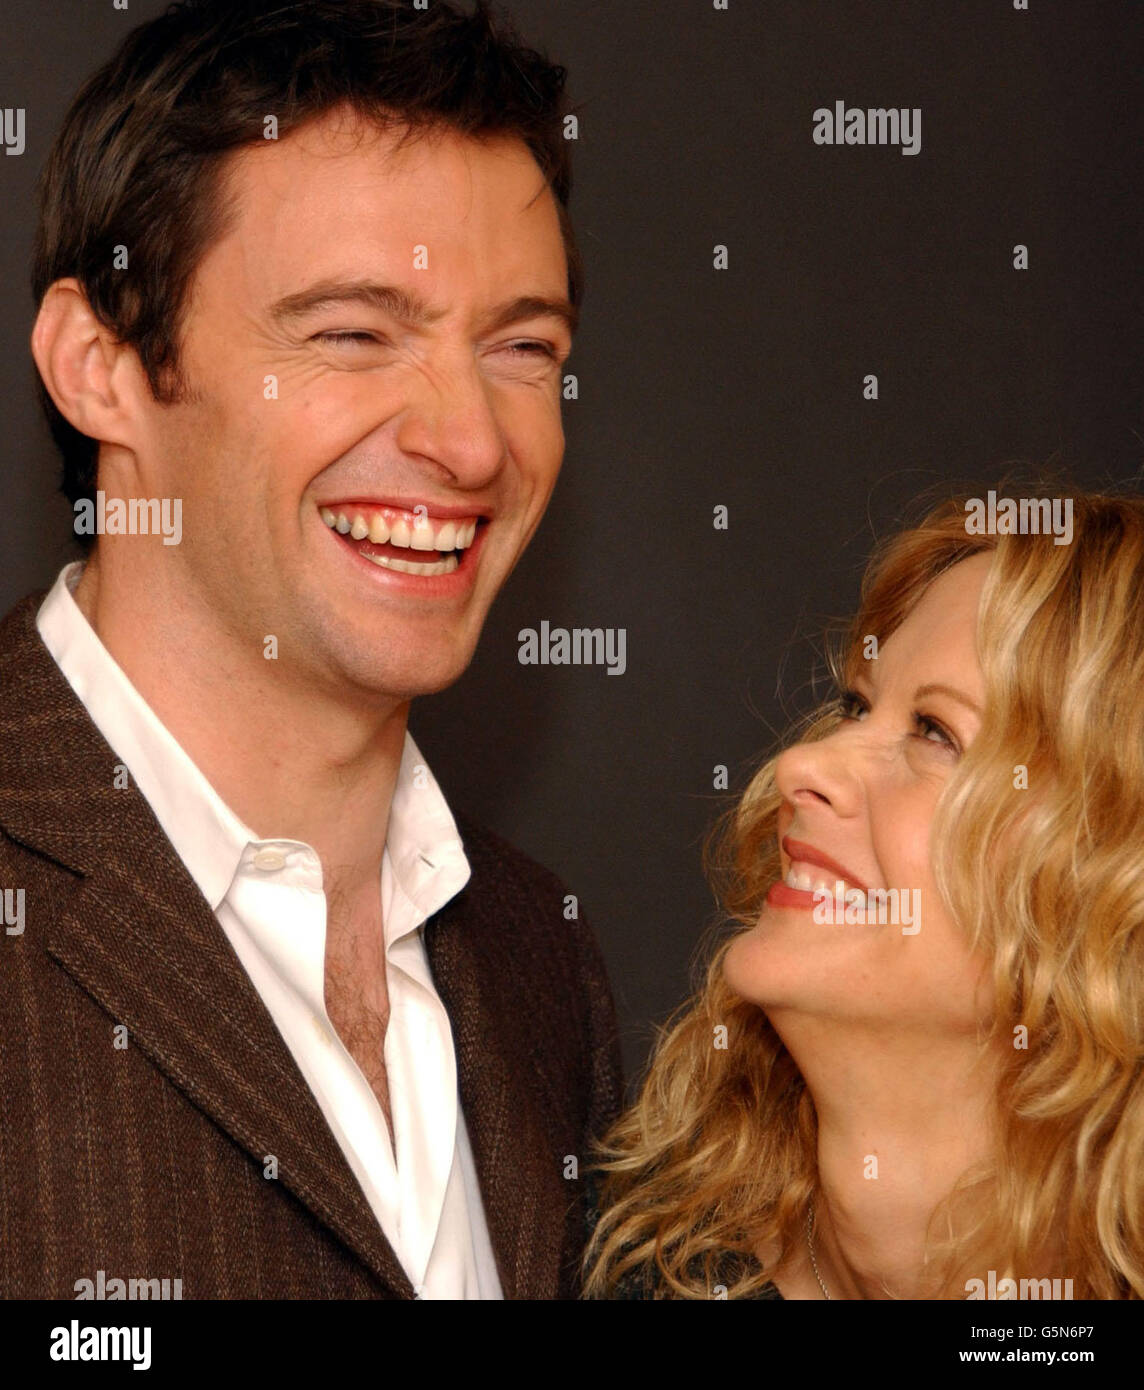 Australian actor Hugh Jackman and US actress Meg Ryan during a photocall at the Dorchester Hotel, London to promote their new film Kate & Leopold. Stock Photo